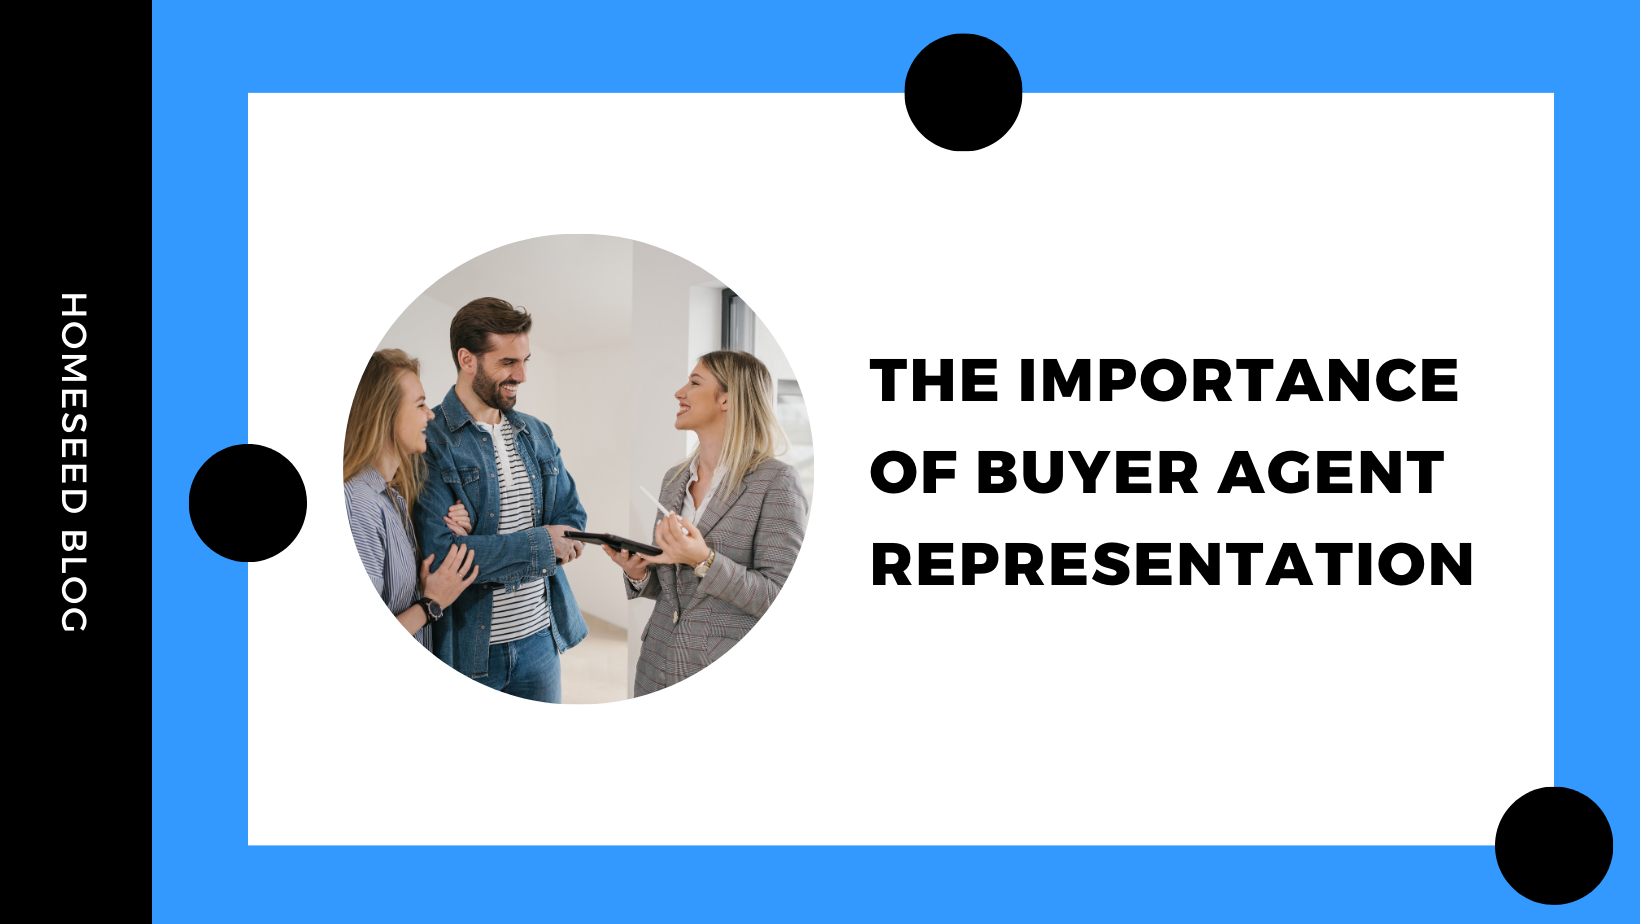 The Importance of Buyer Agent Representation